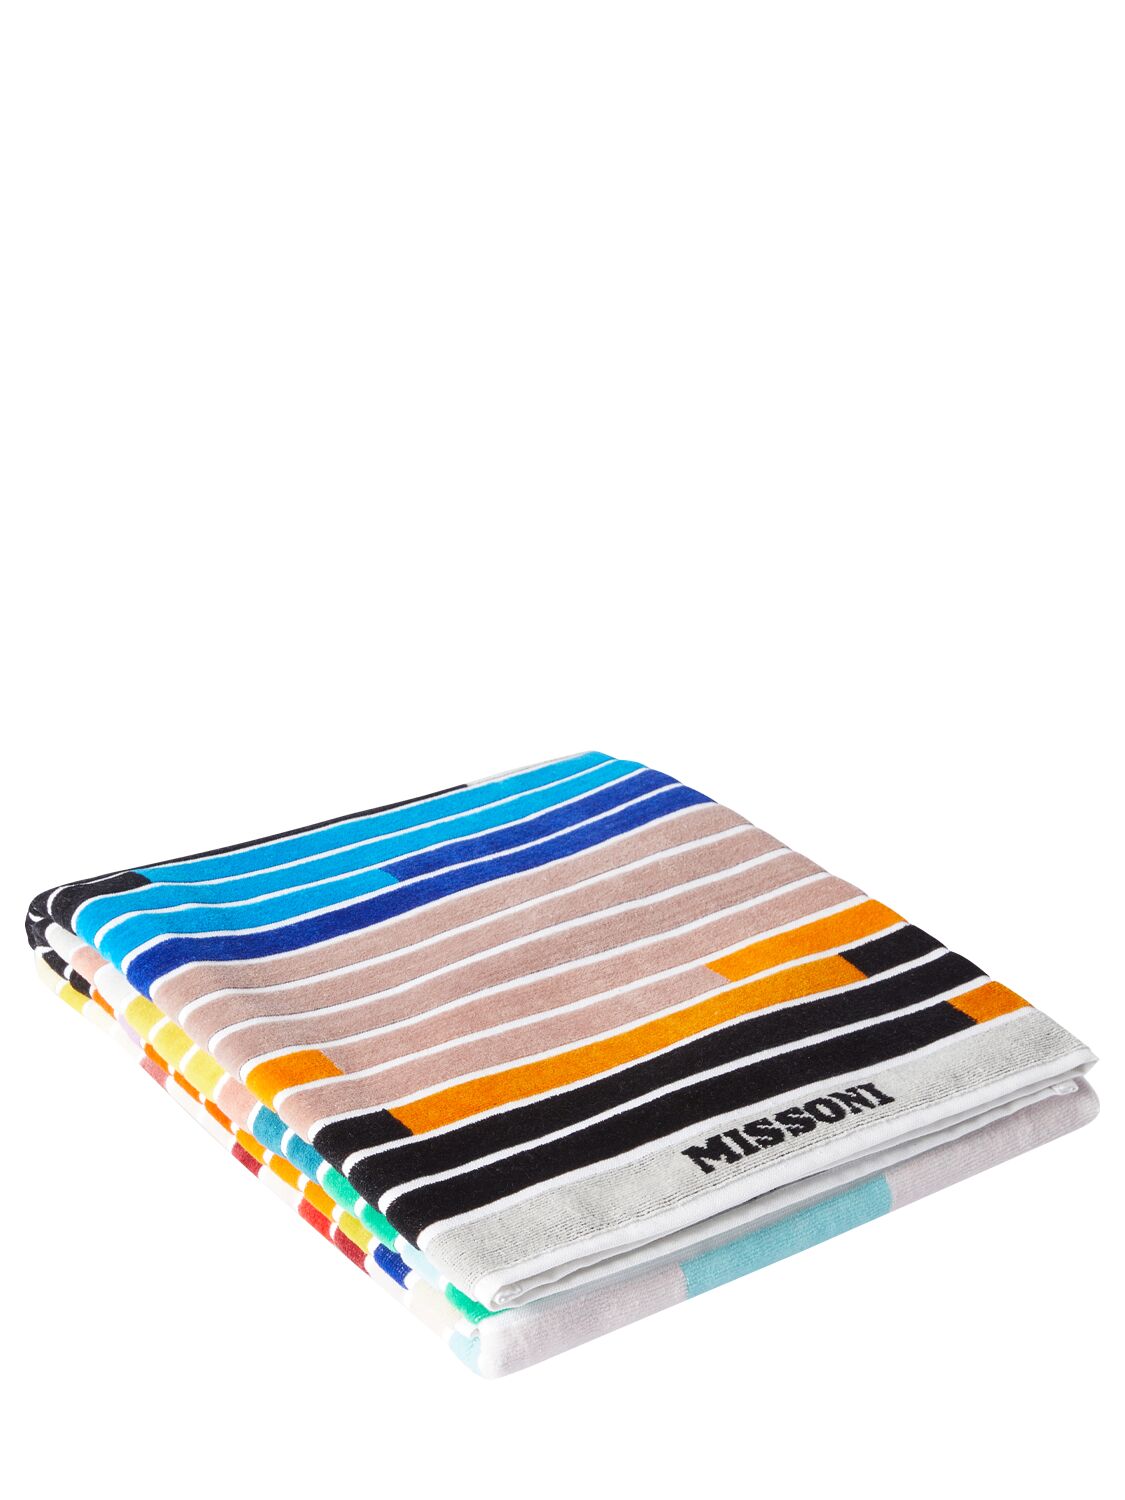 Missoni Home Collection Melody Beach Towel In Multicolor